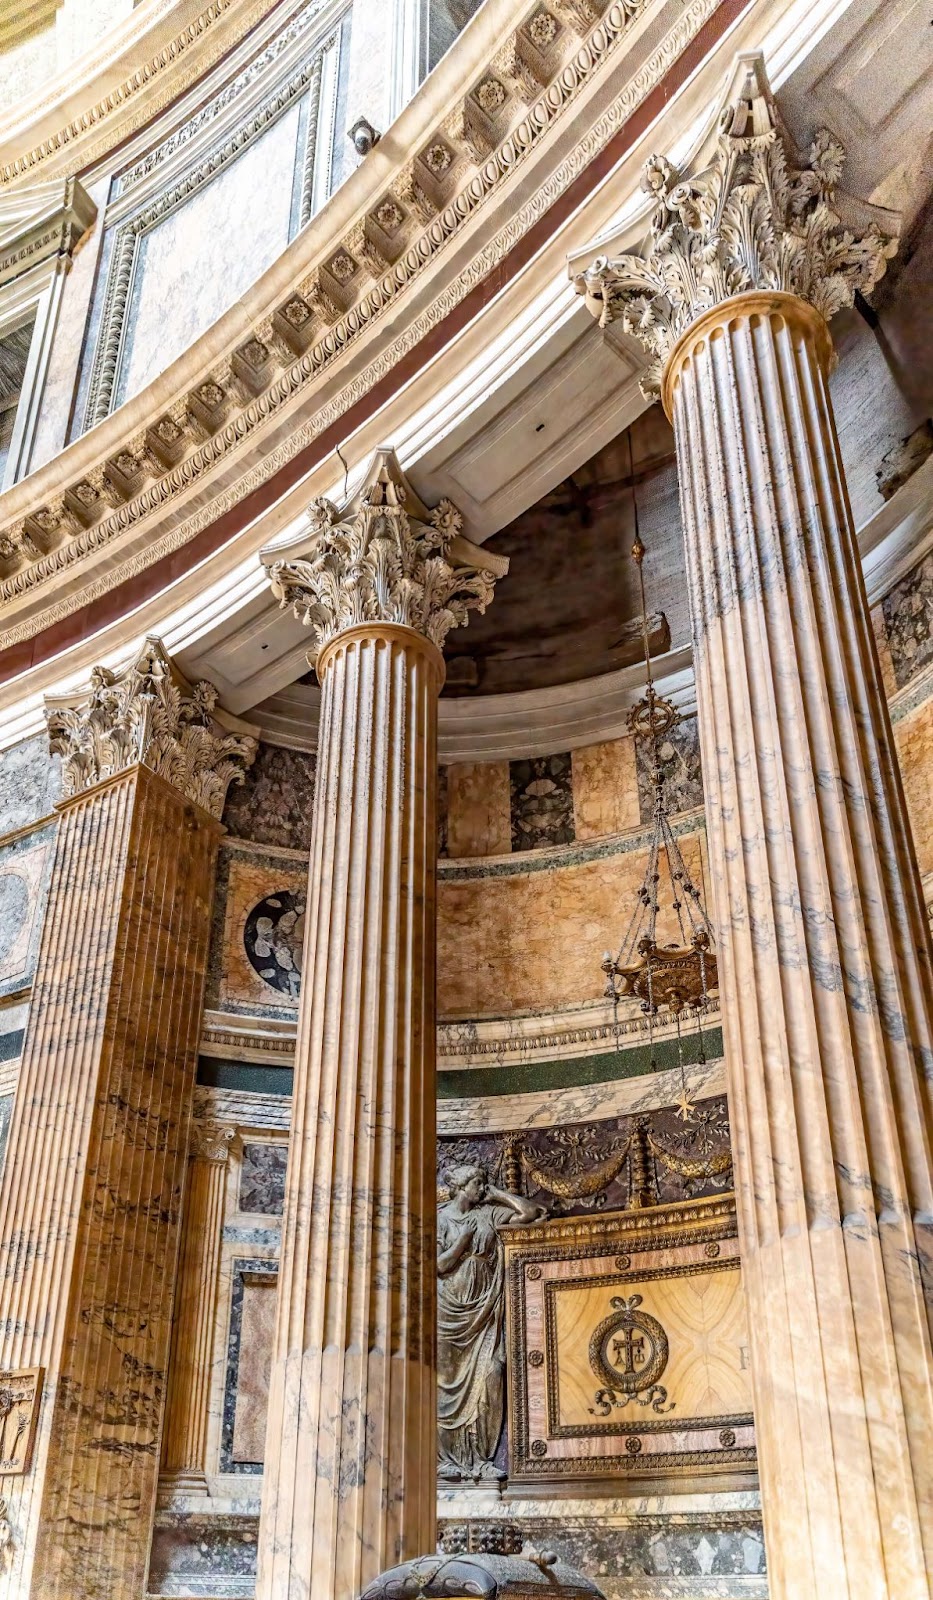 24 hours in Rome. This is an image of the columns at the Pantheon in Rome, Italy.